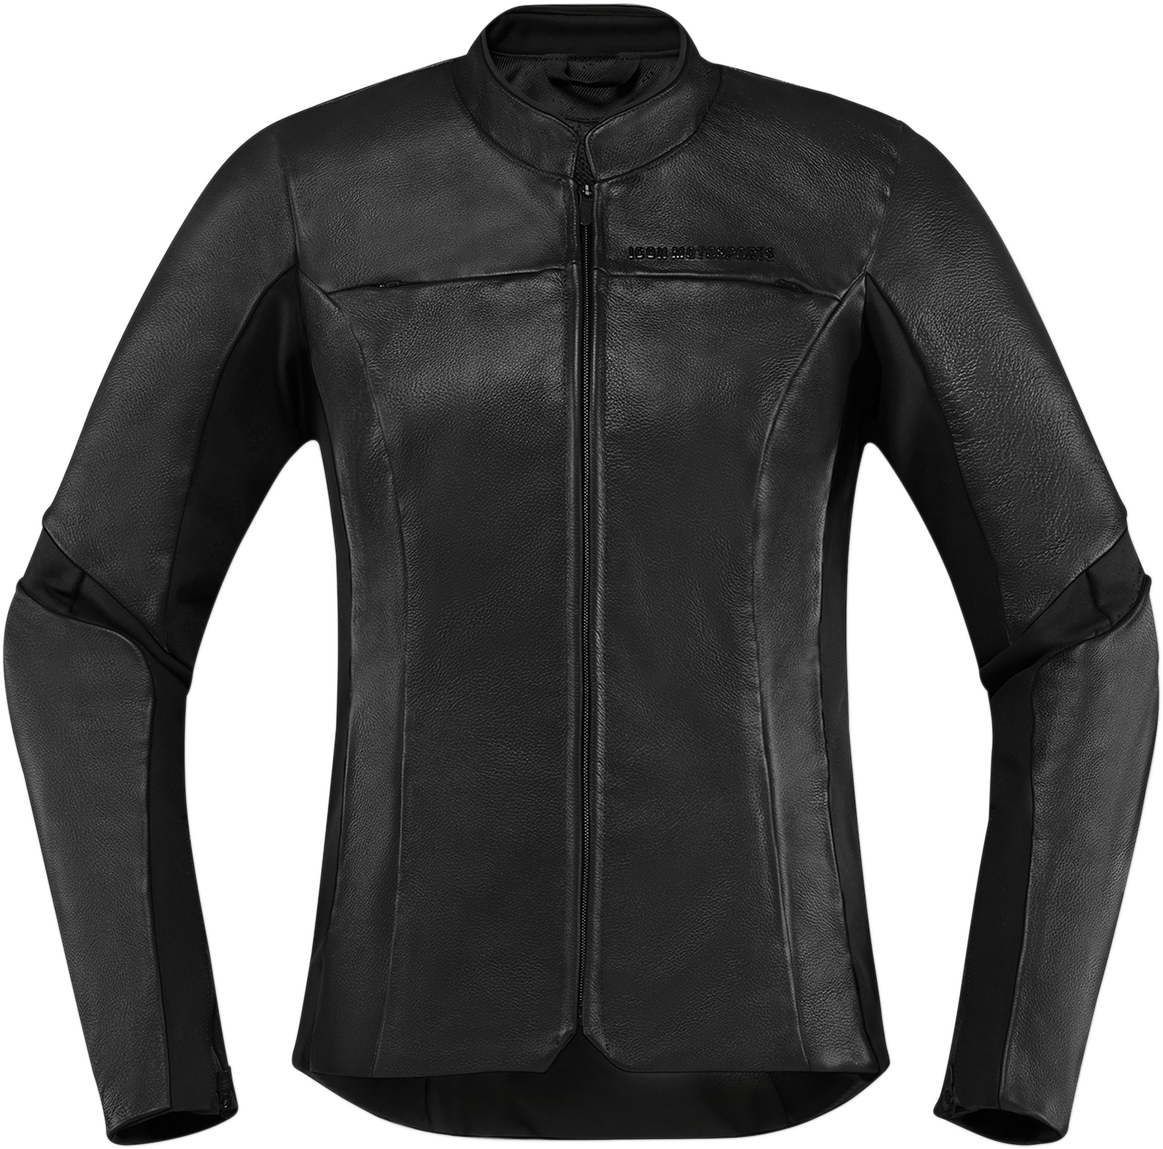 ICON Women's Overlord™ Jacket - Black - Small 2813-0814